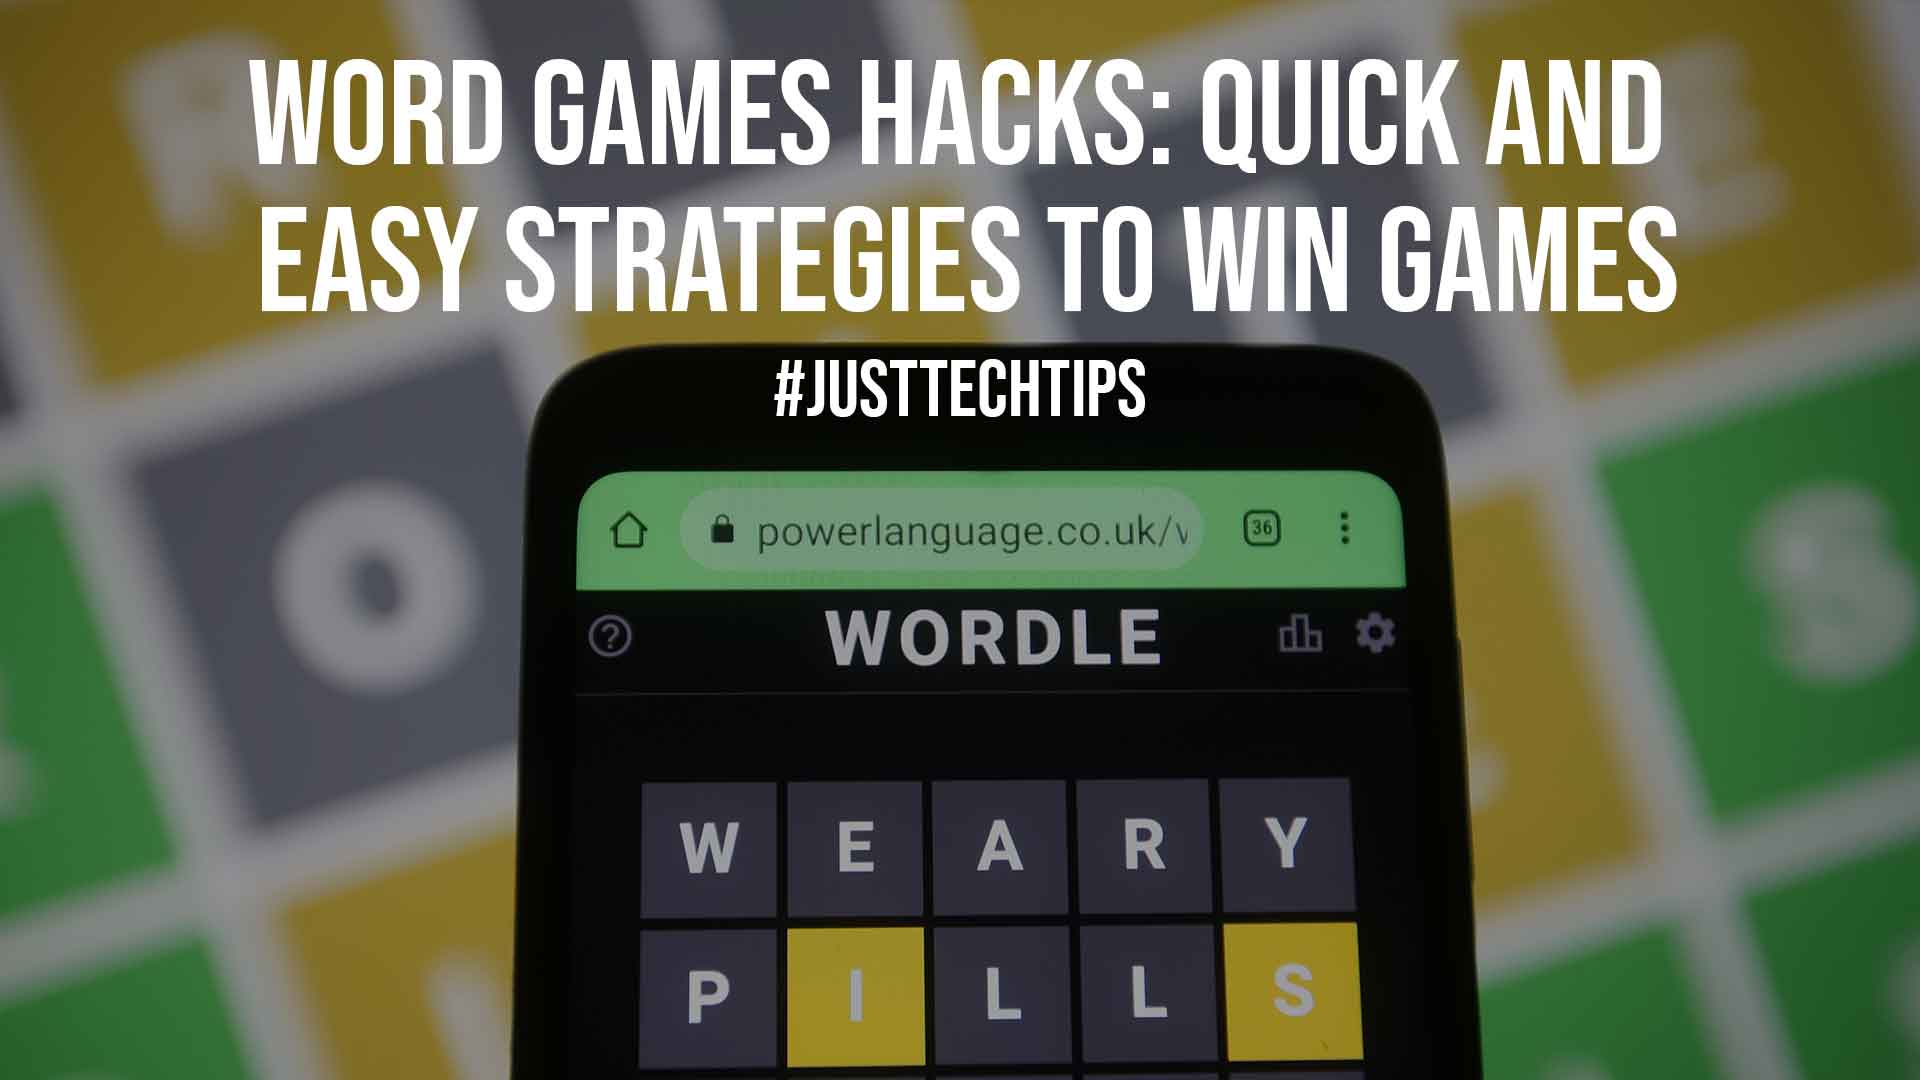 Word Games Hacks Quick and Easy Strategies to Win Games